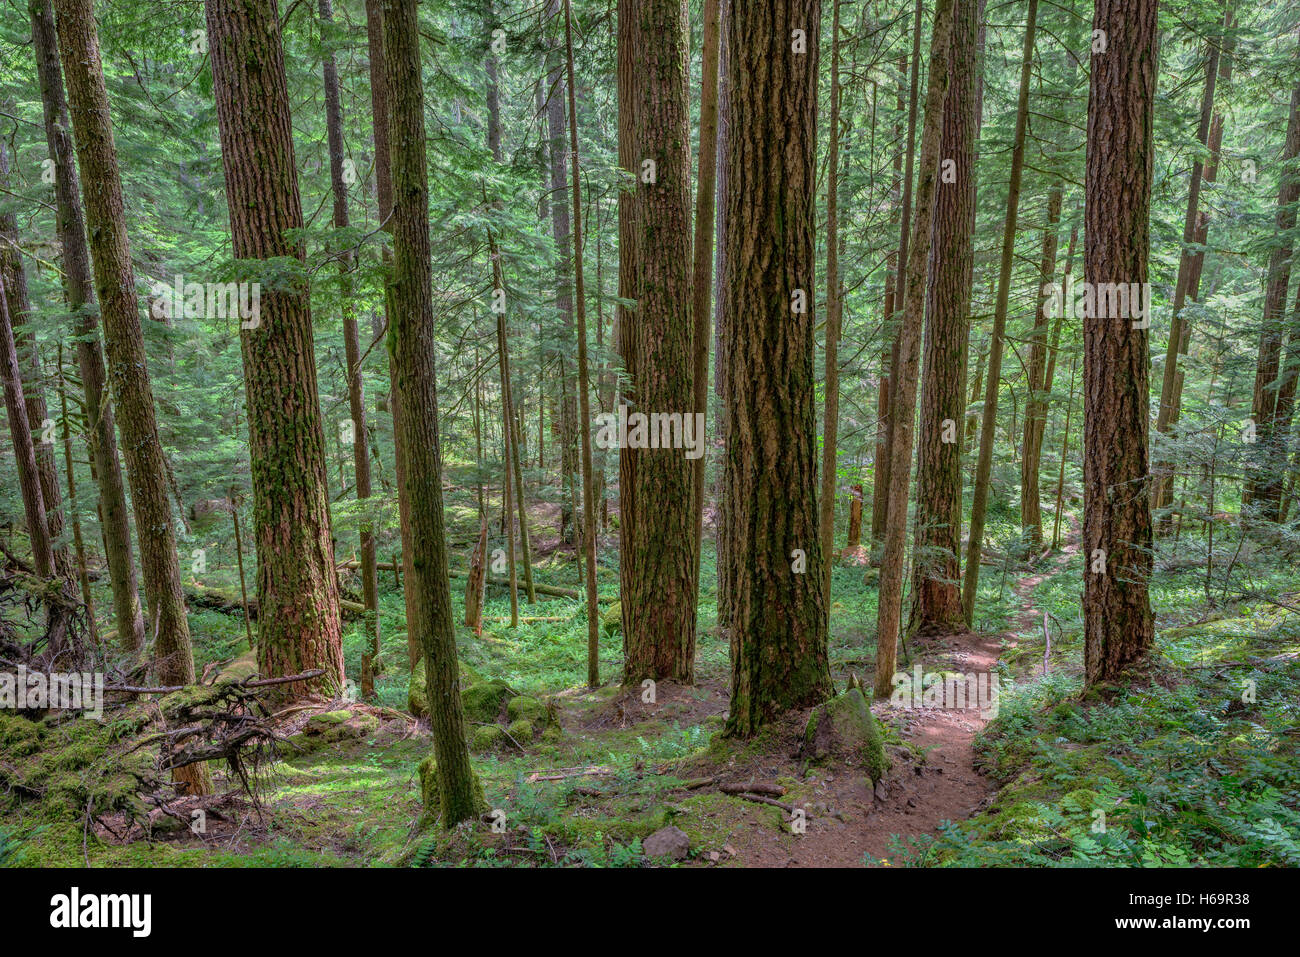 USA, Oregon, Willamette National Forest, South Breitenbush Gorge Recreation Scenic Trail passes through old growth forest. Stock Photo